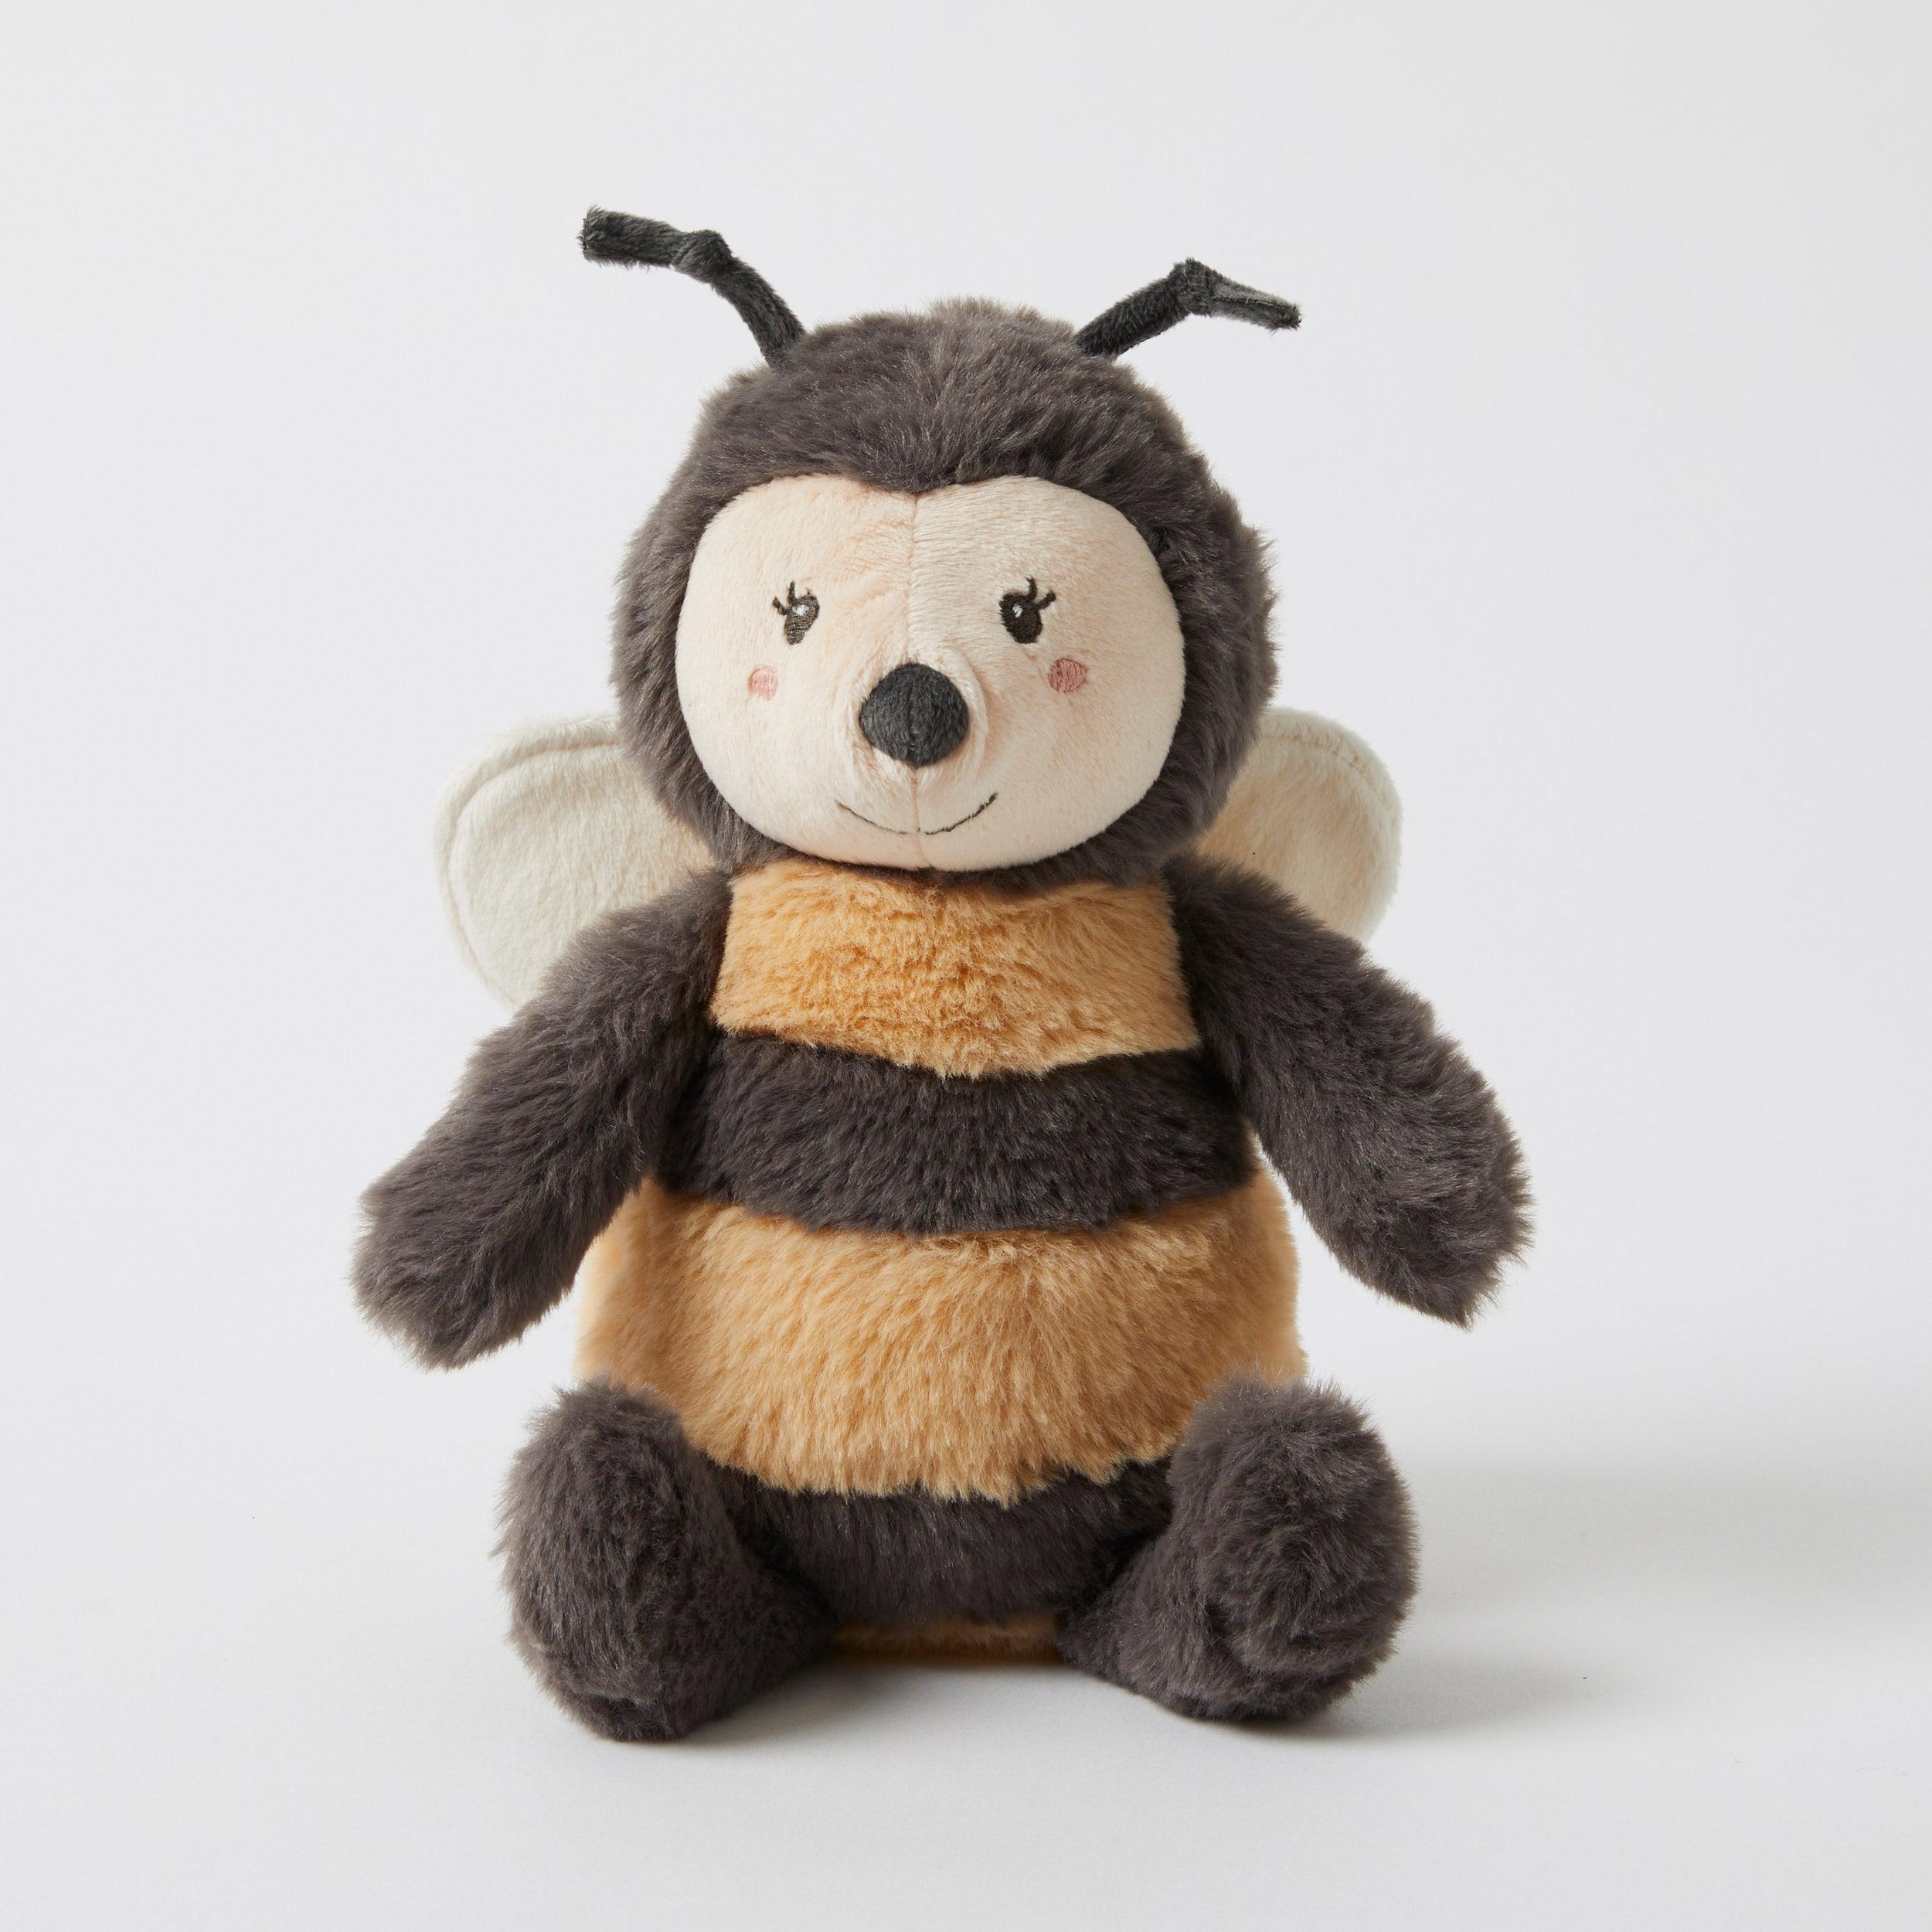 Bee Toys